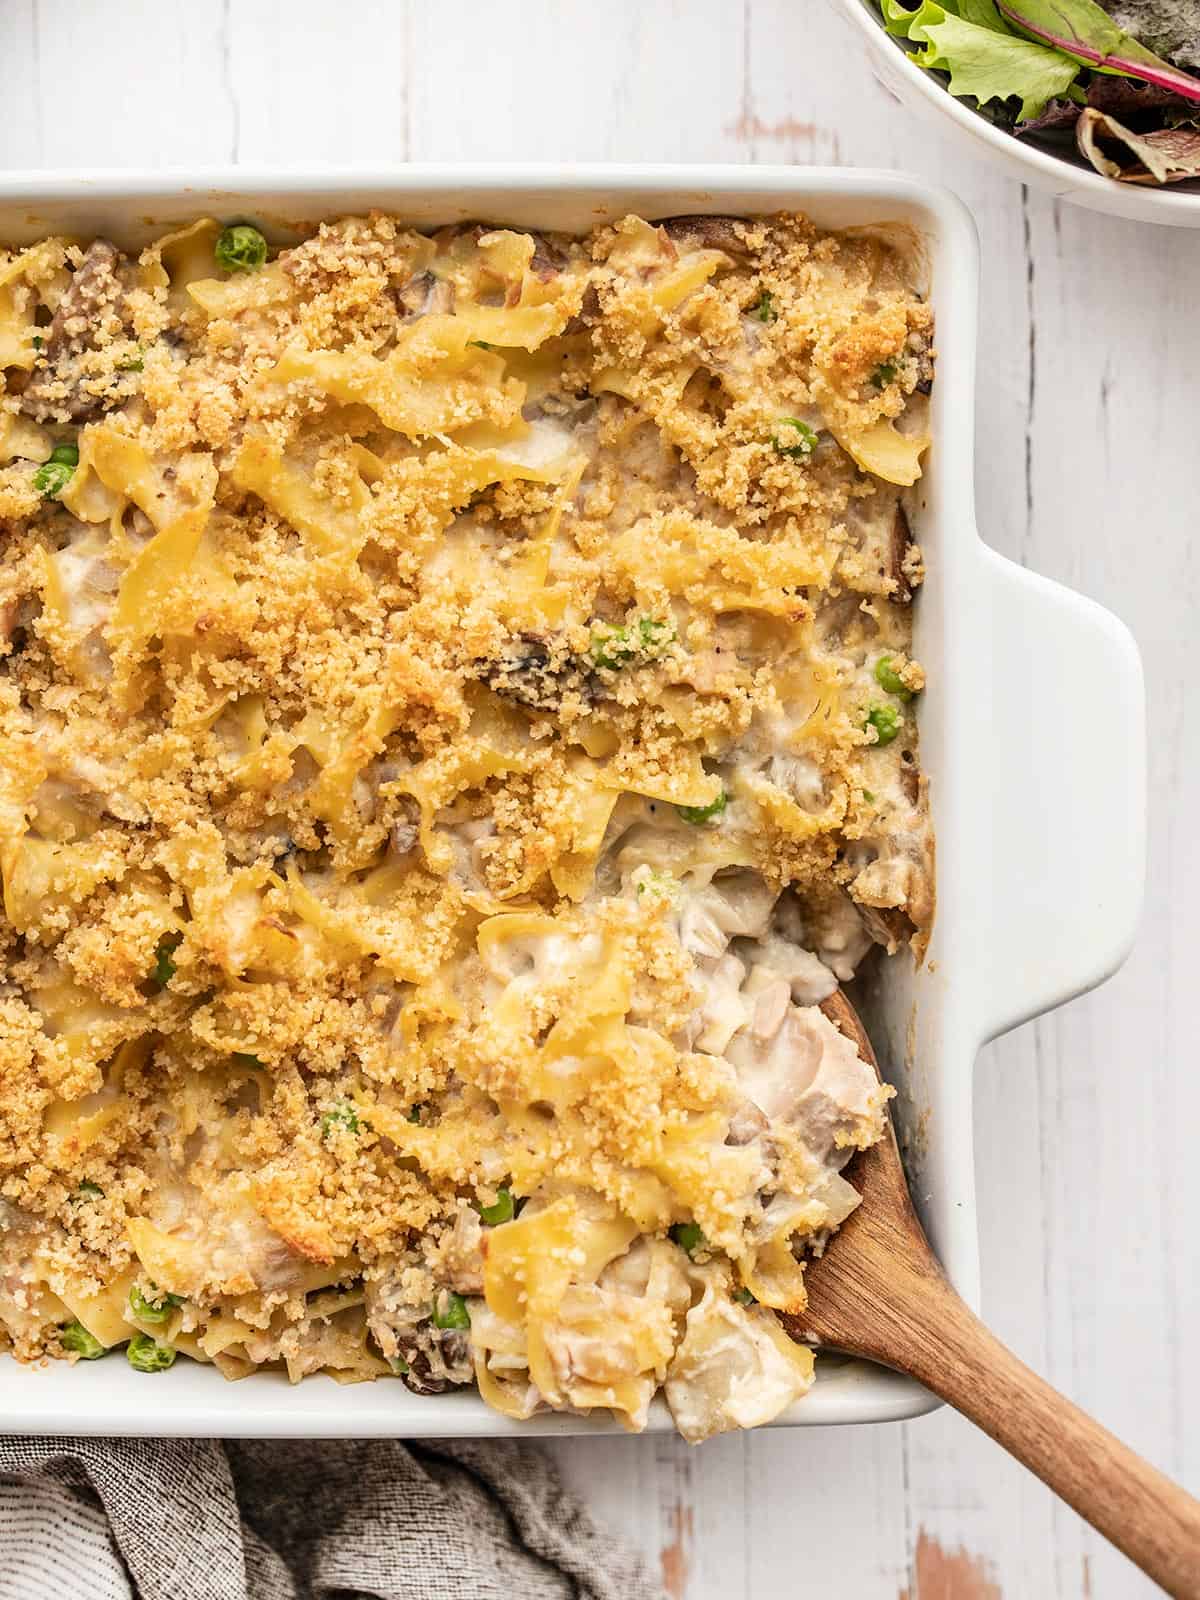 Overhead view of tuna noodle casserole in a square dish with a wooden spoon